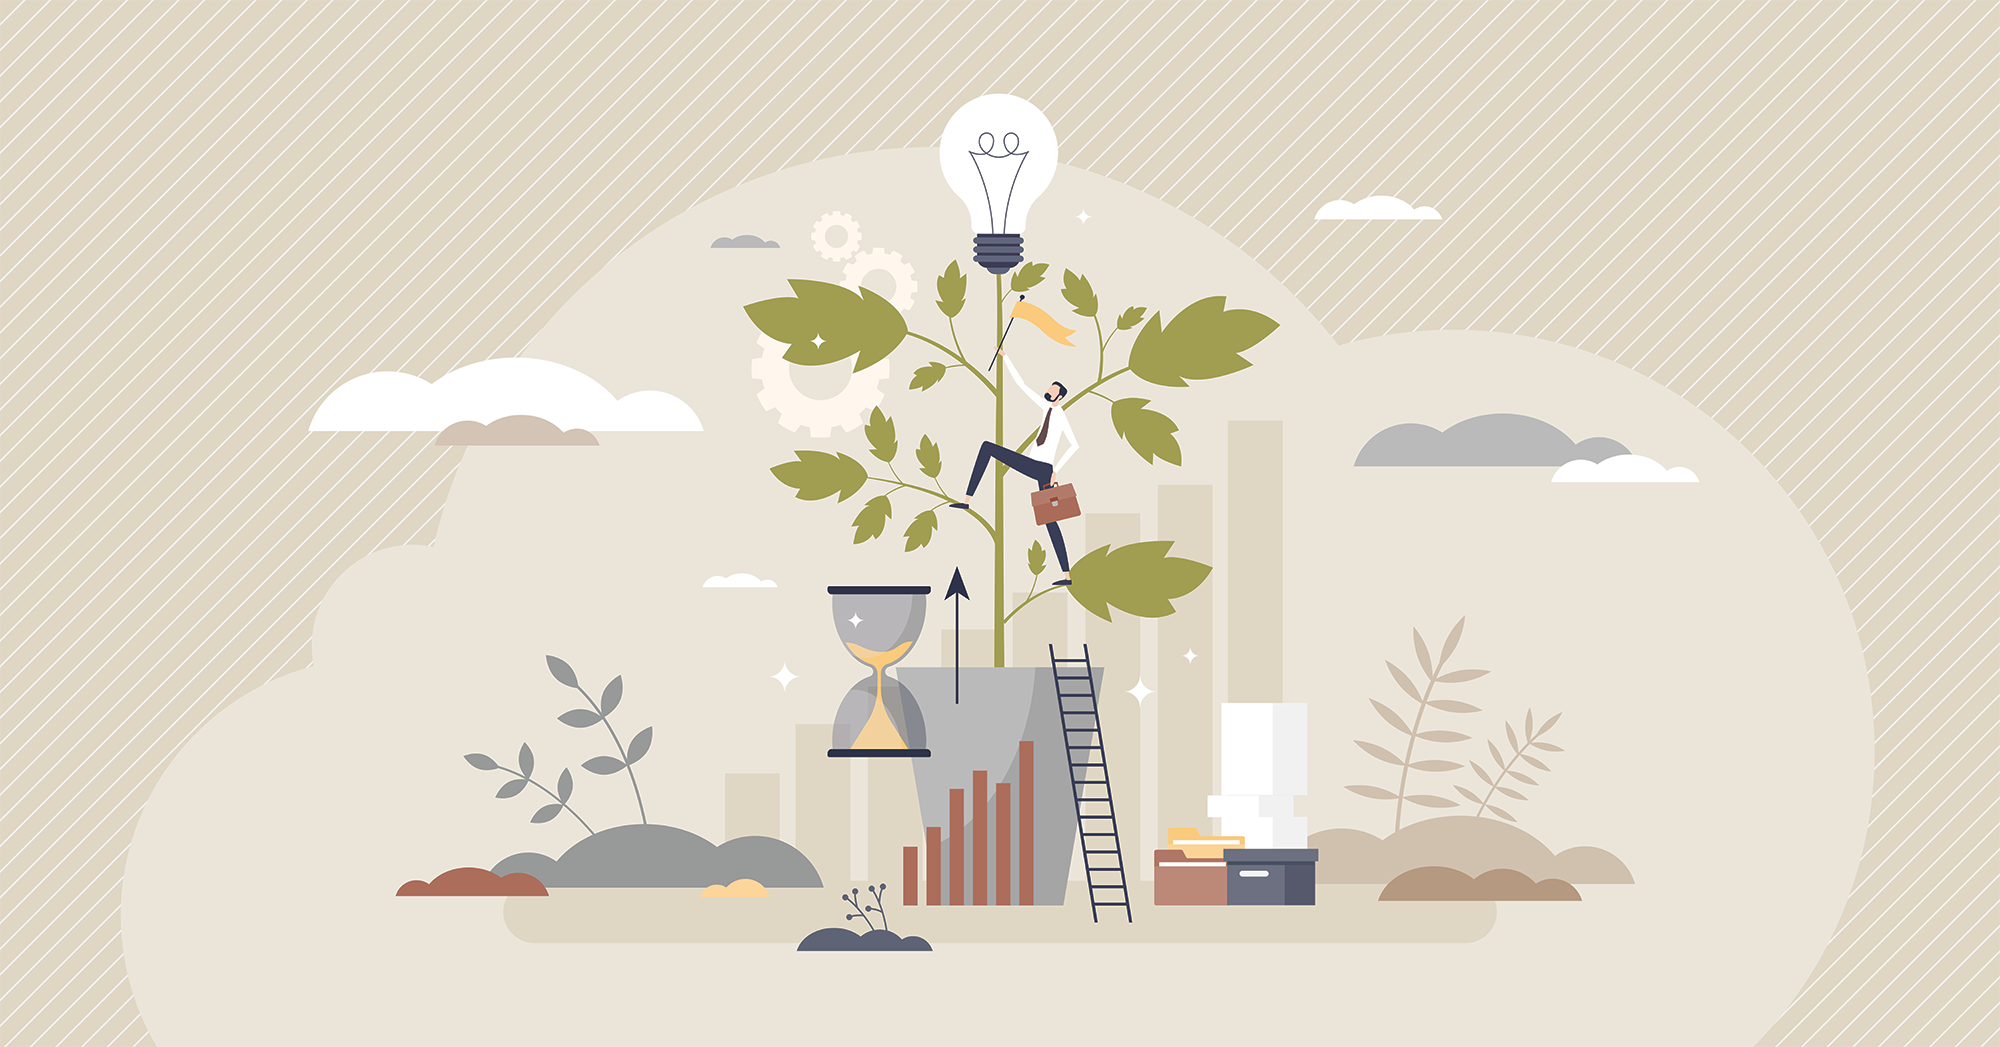 Illustration representing a growing workplace. Plant in the middle with person climbing plant to reach lightbulb on top. Graphs and business items surround the plant.